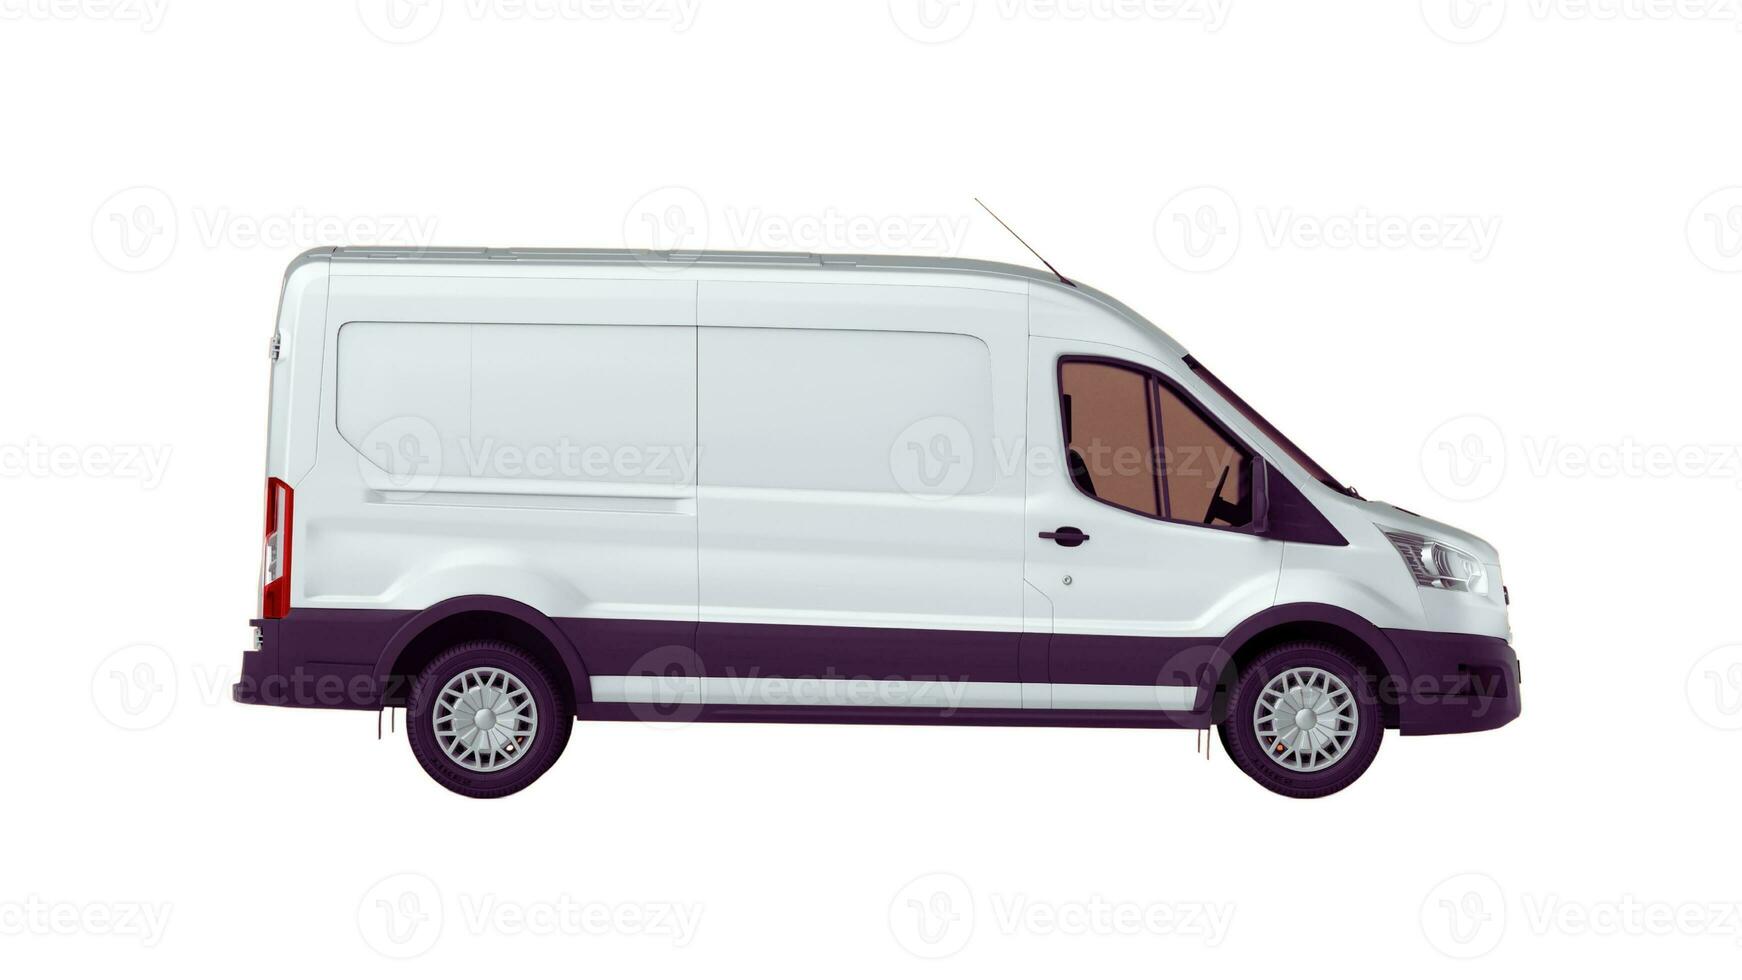 Editable Delivery Van Mockup, Realistic Cargo Transportation Vehicle Template Isolated on White Background for Branding and Advertising Design photo